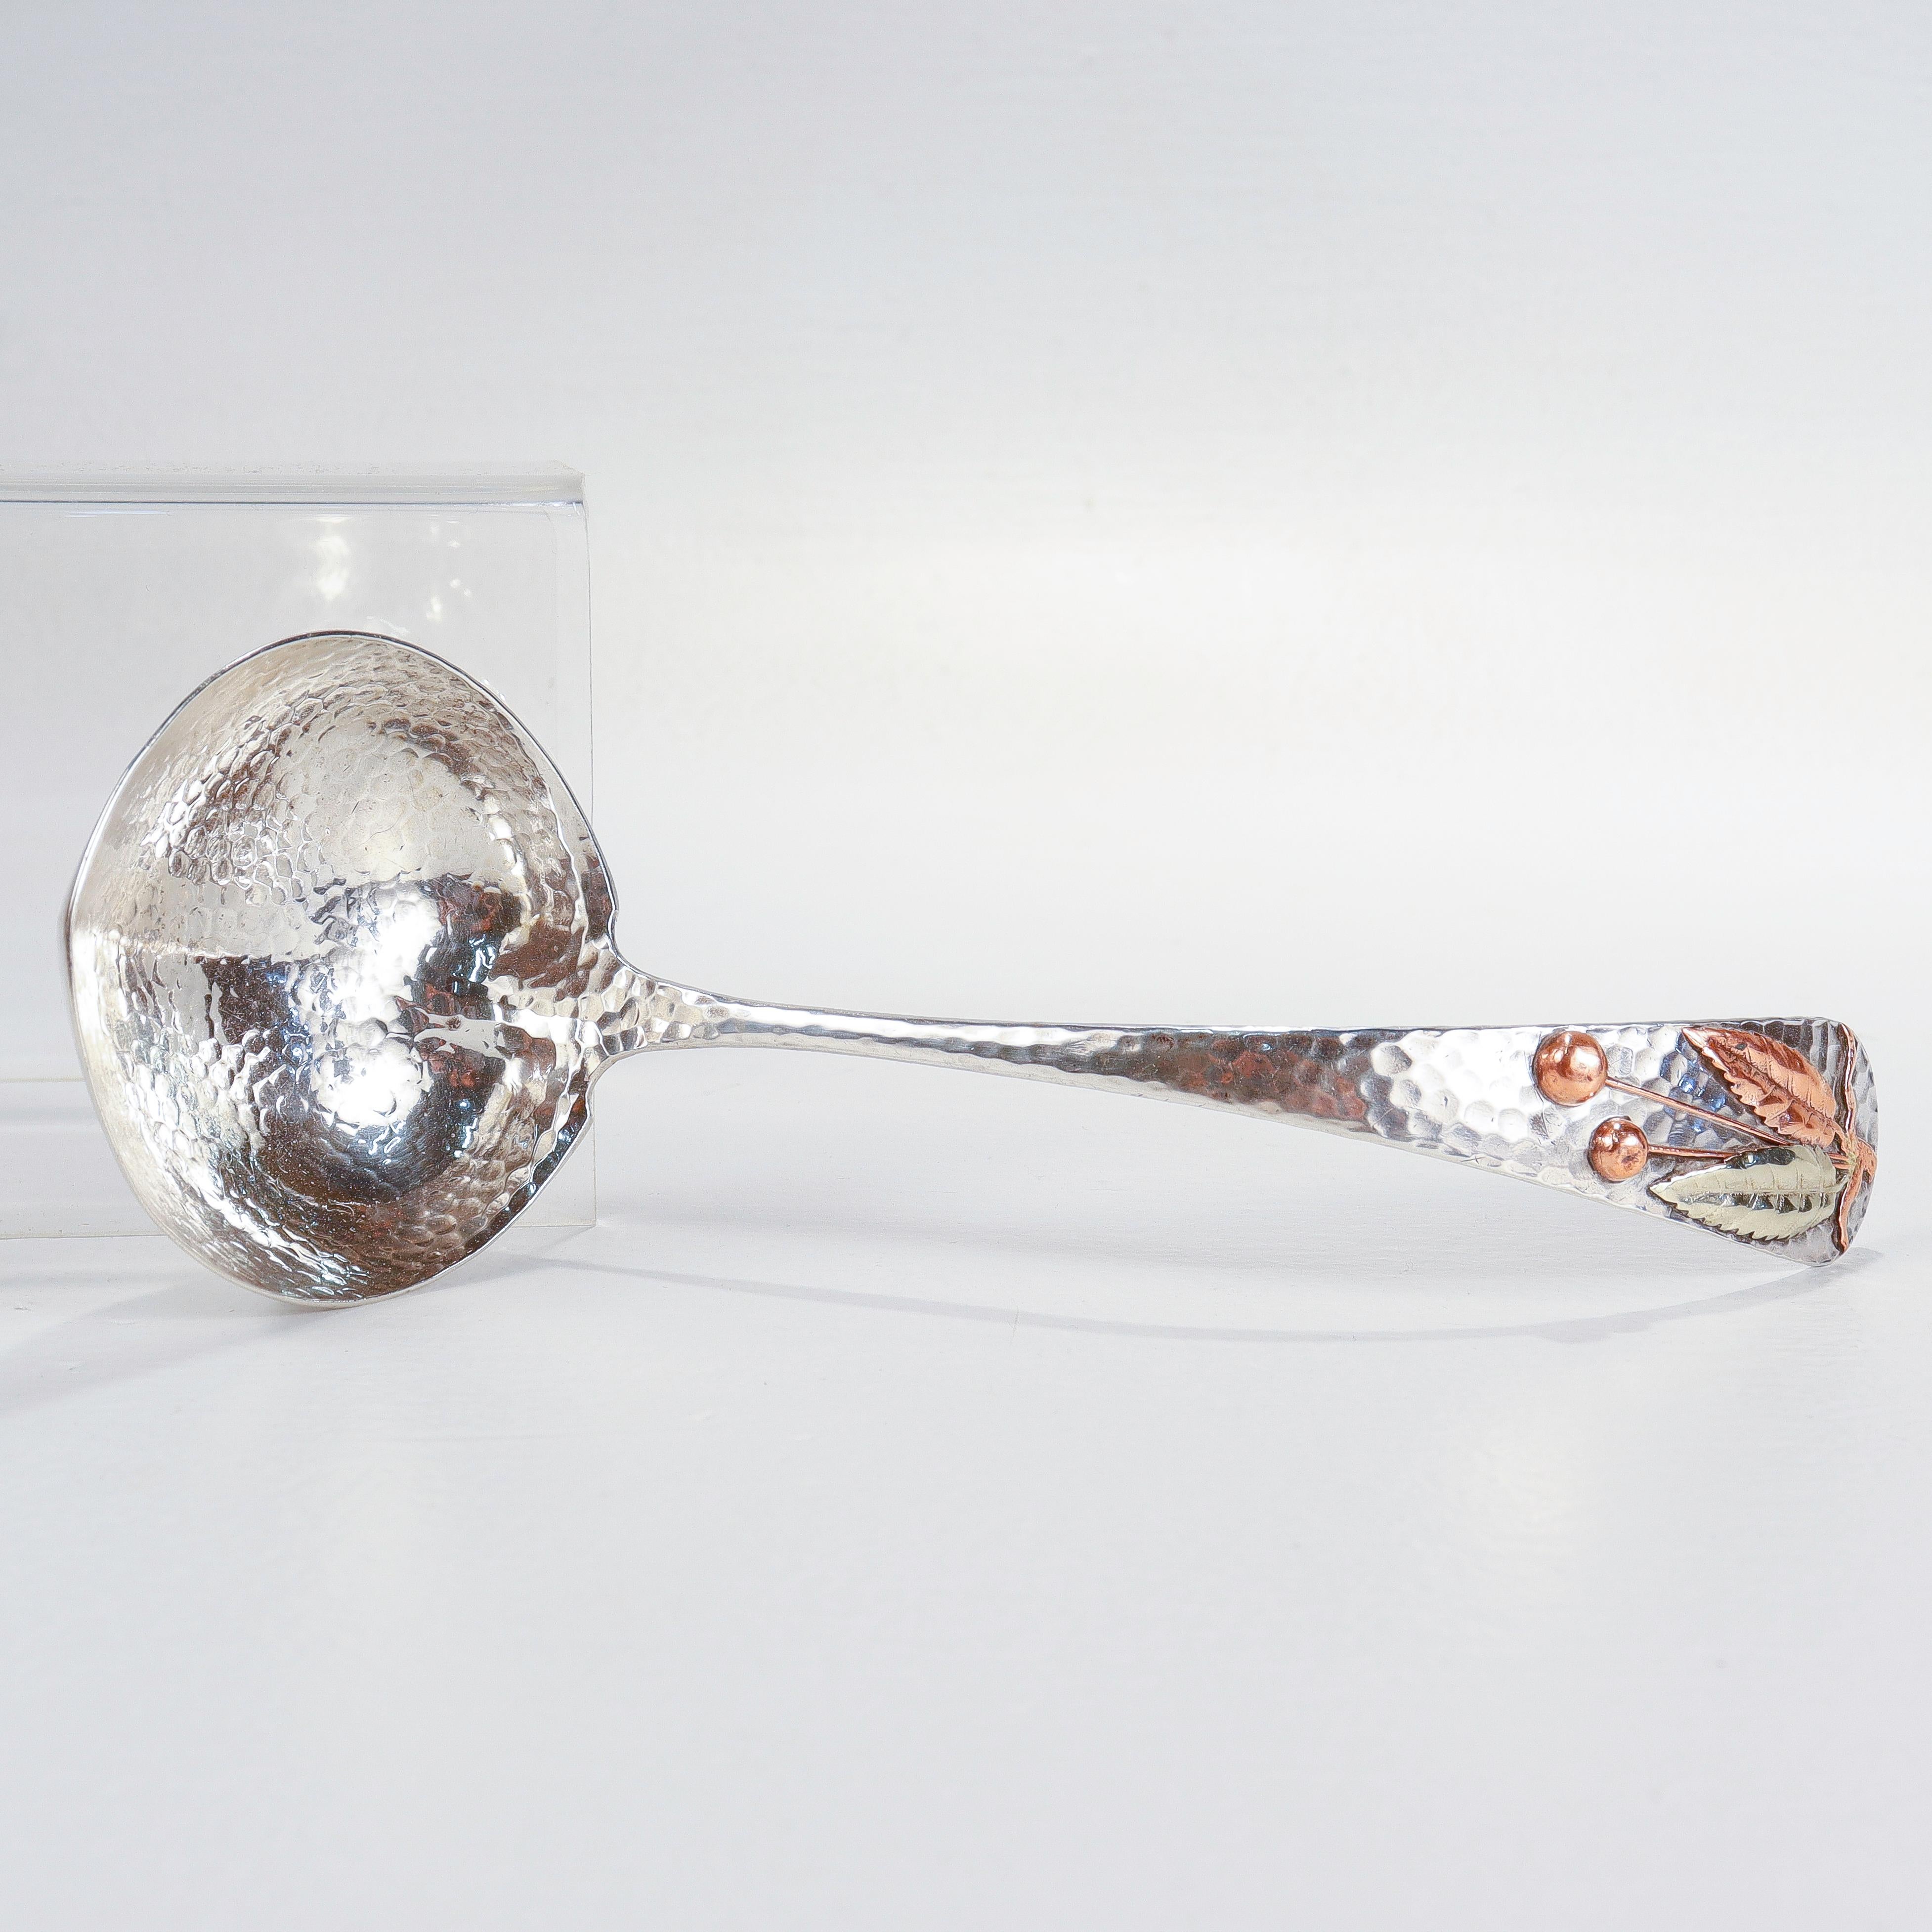 Antique Gorham Hand-Hammered Sterling Silver & Mixed Metals Sauce Ladle For Sale 4